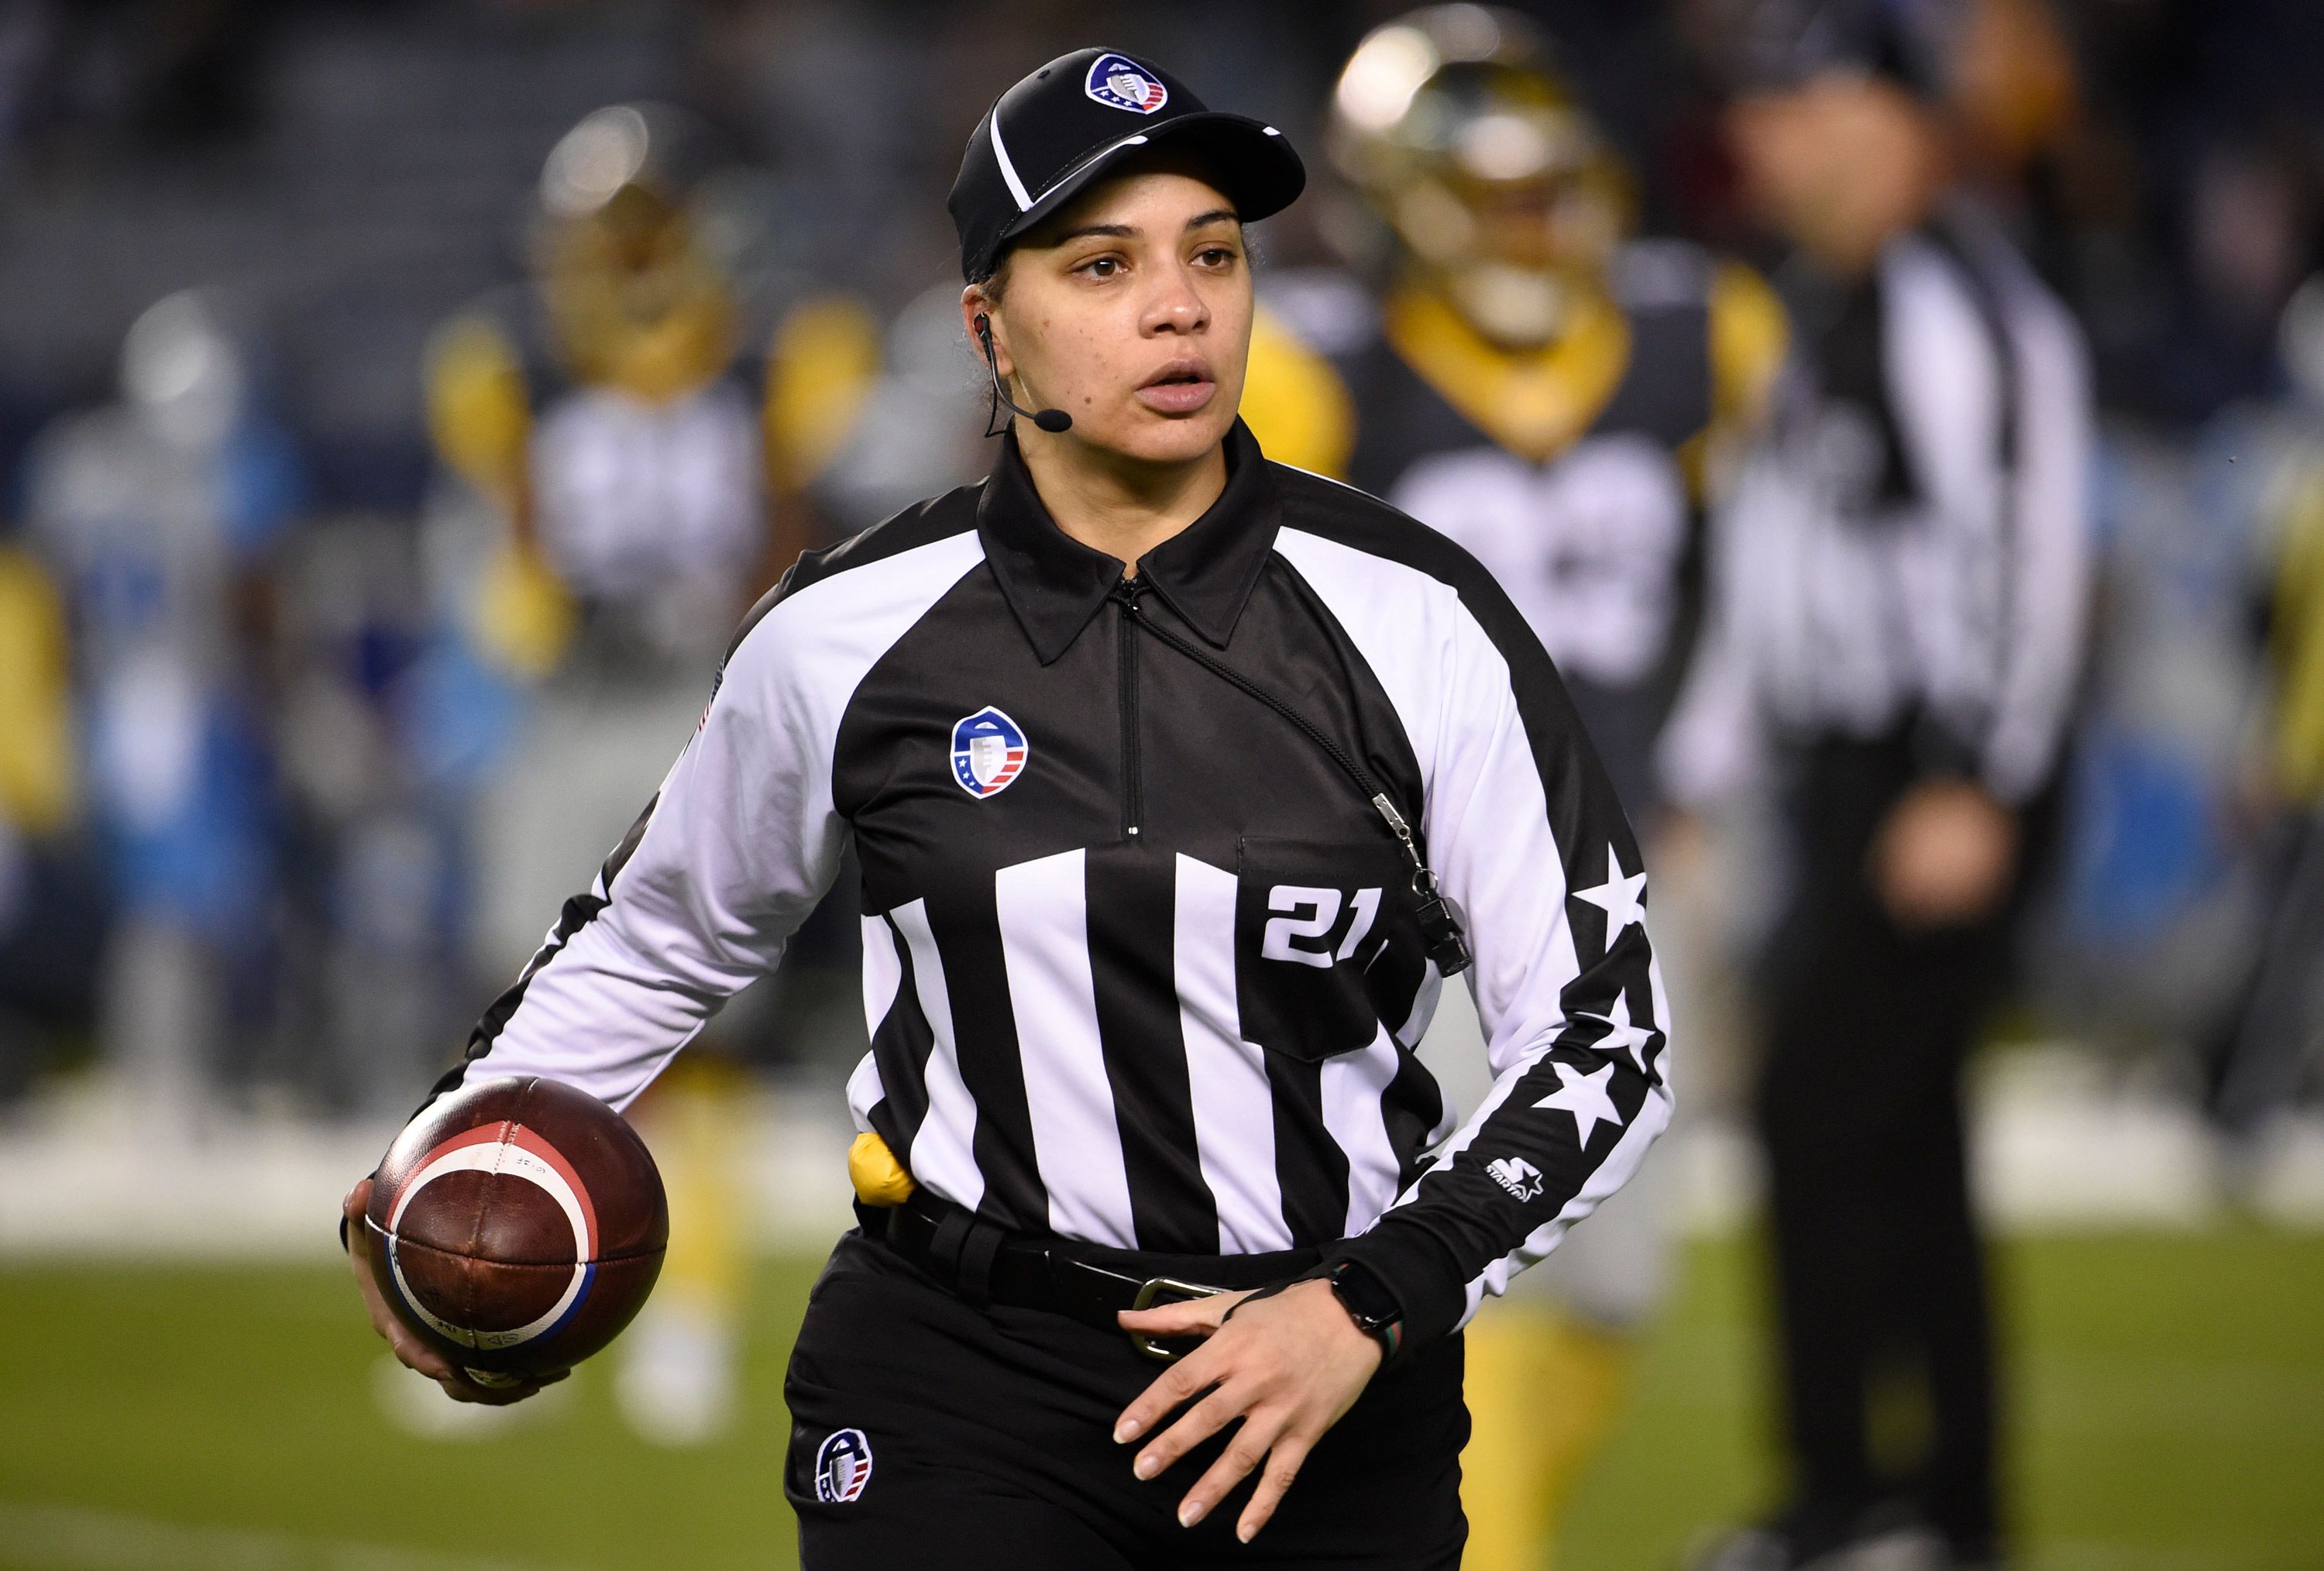 Maia Chaka Makes History as the First Black Woman to Officiate an NFL Game